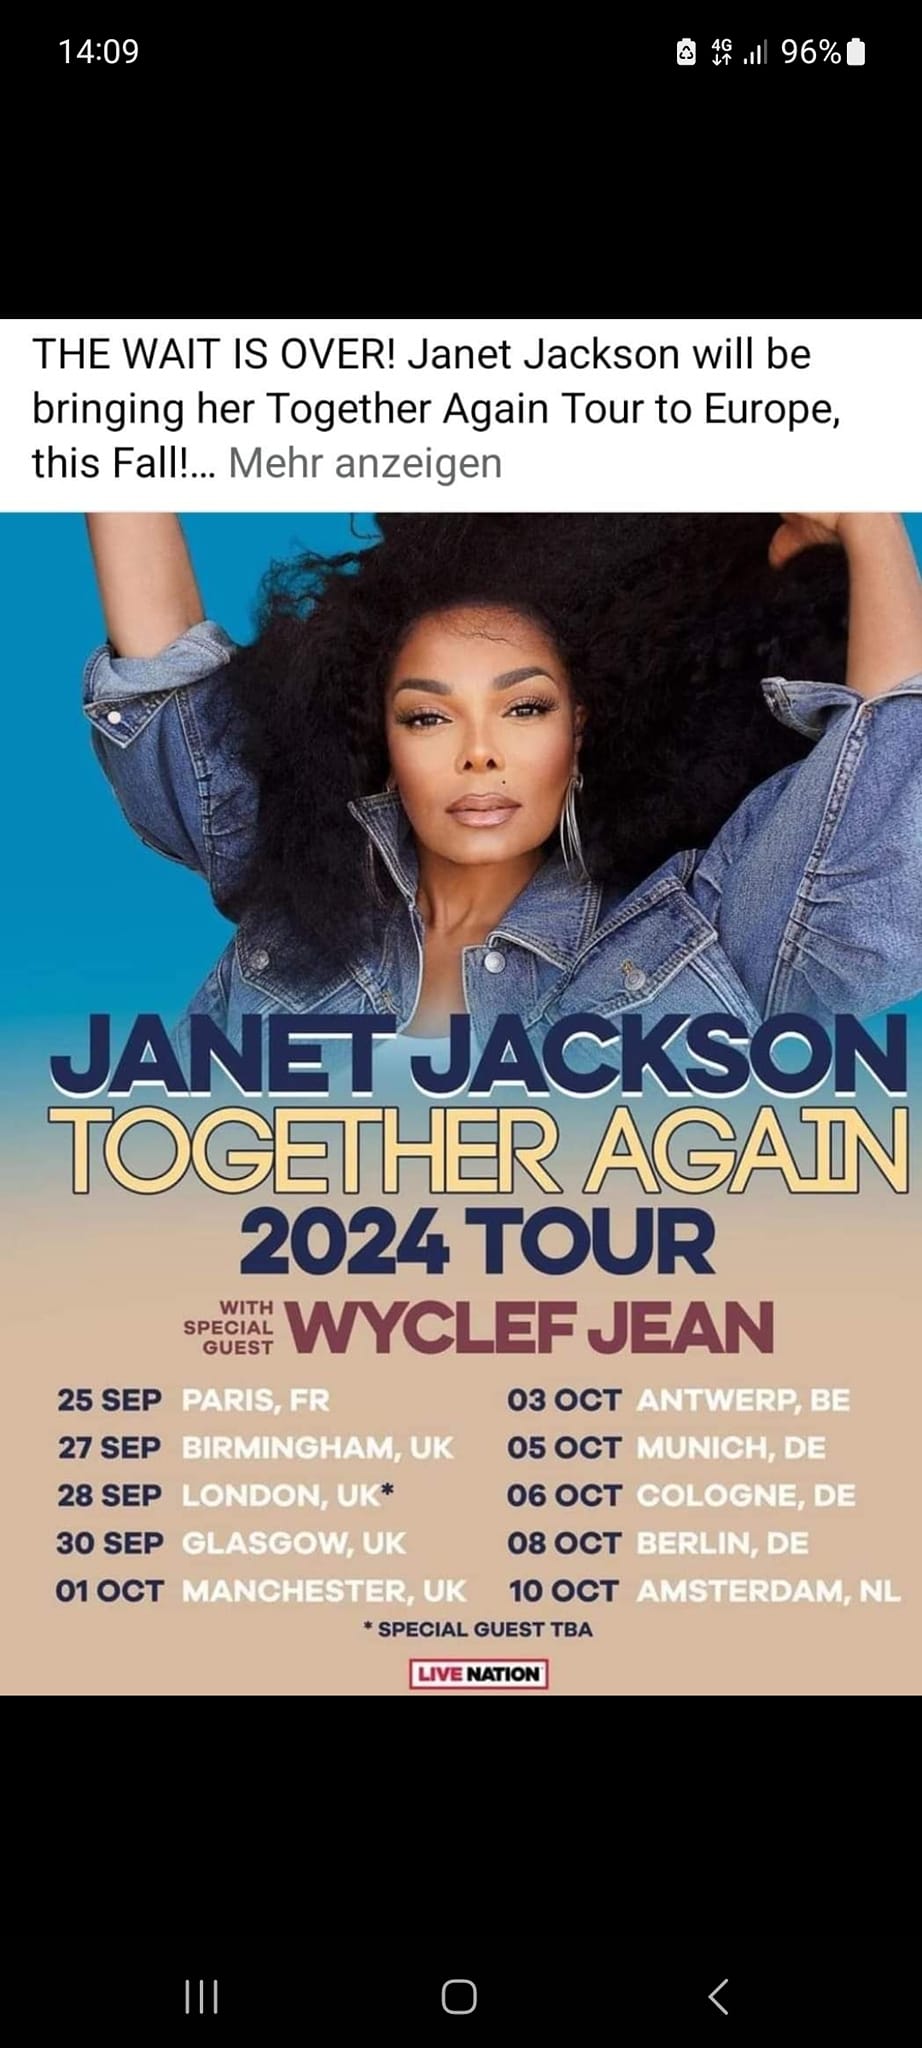 May be an image of 1 person and text that says '14:09 96% HE WAIT IS OVER! Janet Jackson will be bringing her Together Again Tour to Europe, this Fall!... Mehr anzeigen JANETJACKSON TOGETHER AGAIN 2024 TOUR WITH ECIAL GUEST WYCLEF JEAN 25 SEP PARIS PARIS,FR FR 03 OCT ANTWERP, BE 27 SEP BIRMINGHAM, UK 05 050CT MUNICH, DE 28 SEP LONDON, UK* 06 O6OCT OCT COLOGNE, DE 30 SEP GLASGOW, UK 08 08OT BERLIN, DE 01 OCT MANCHESTER, UK 10 OCT AMSTERDAM, NL SPECIAL GUEST TBA LIVE NATION'